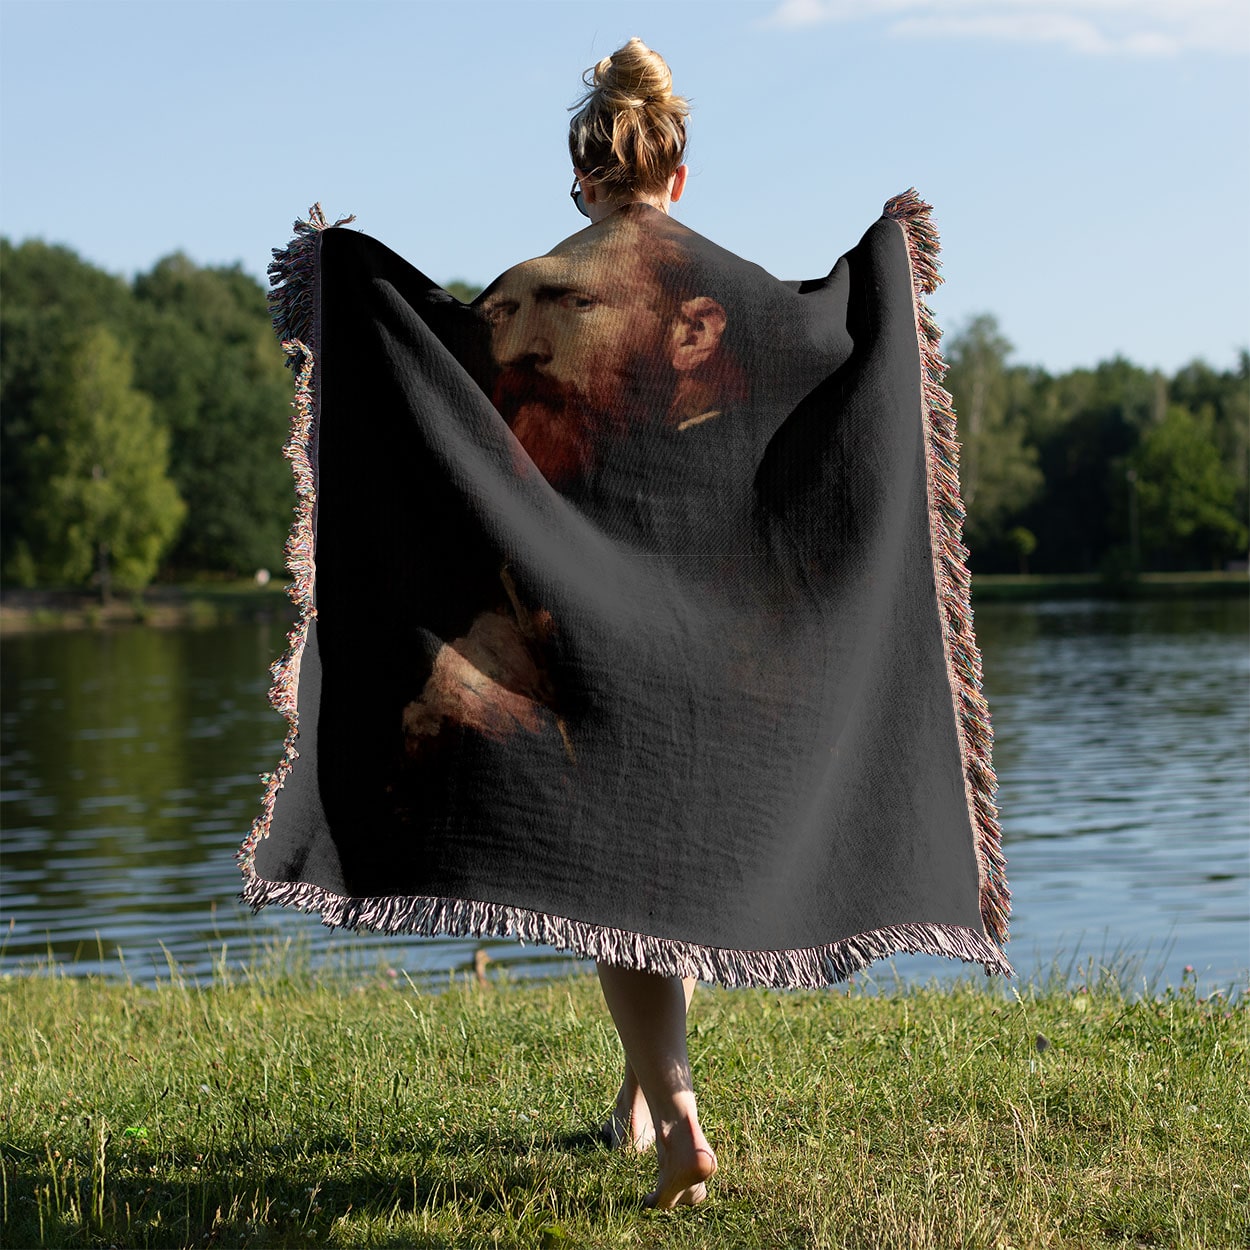 The Painter Woven Blanket Held on a Woman's Back Outside